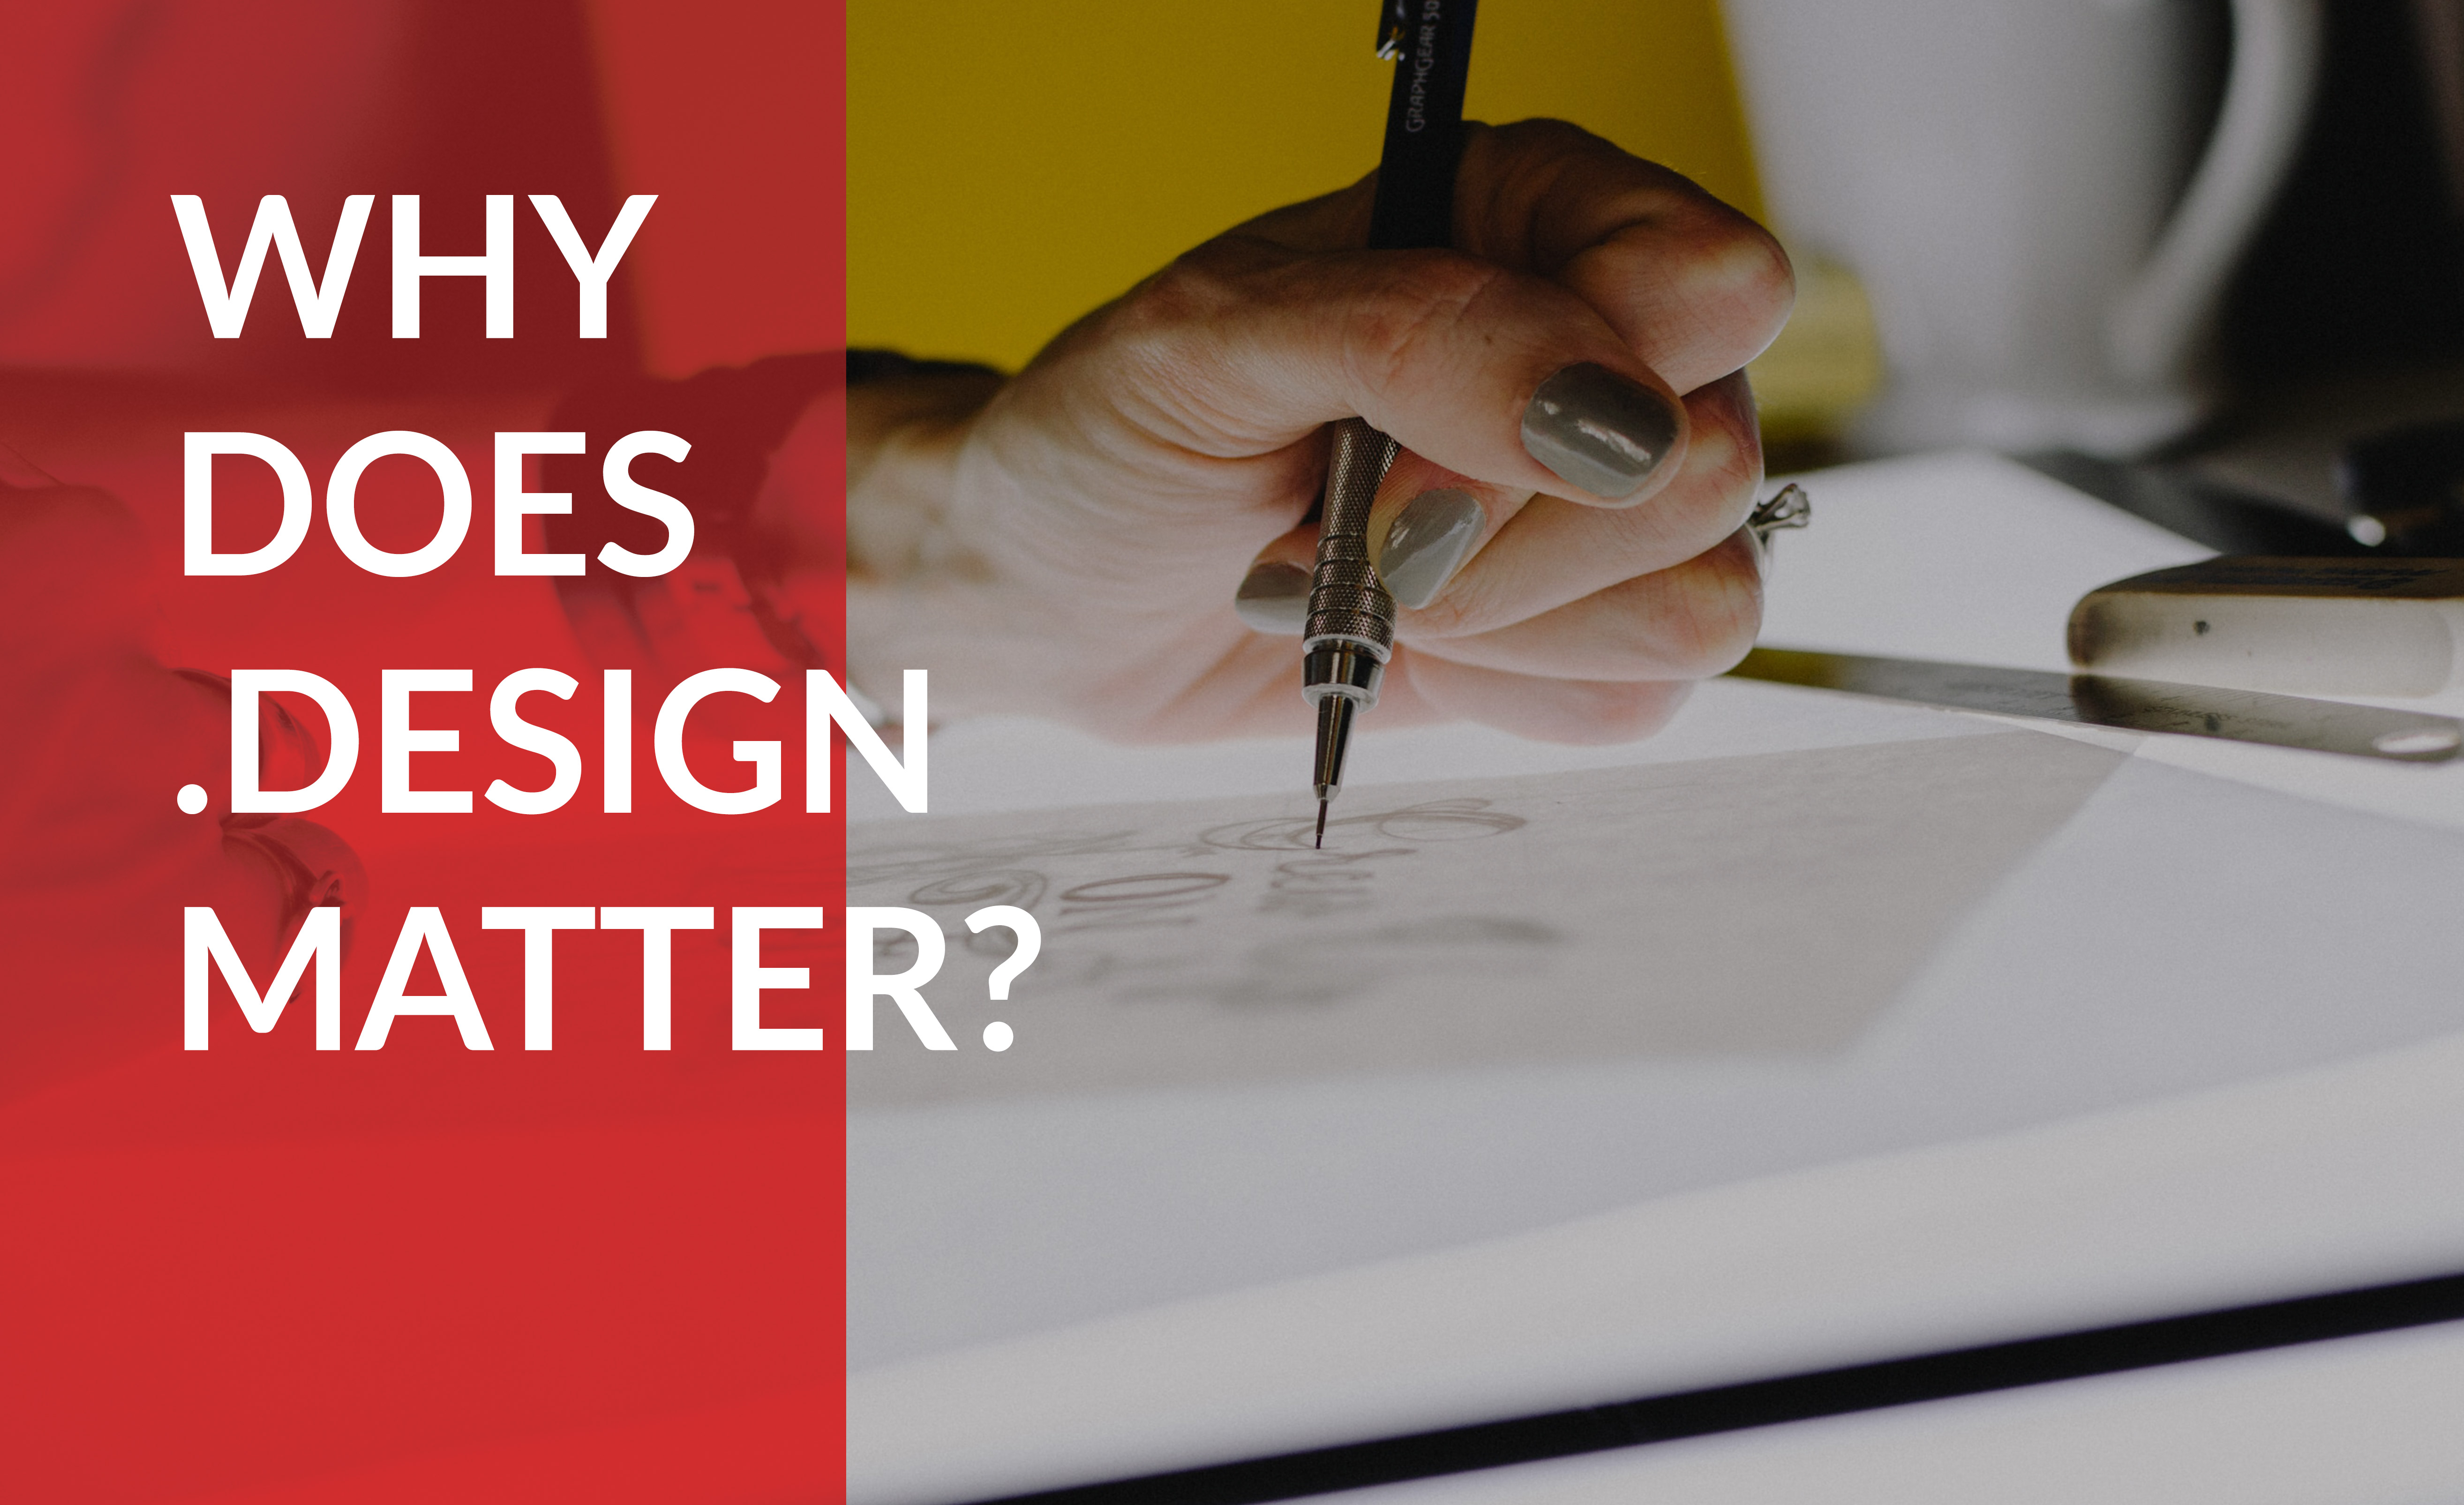 Why does .design matter?